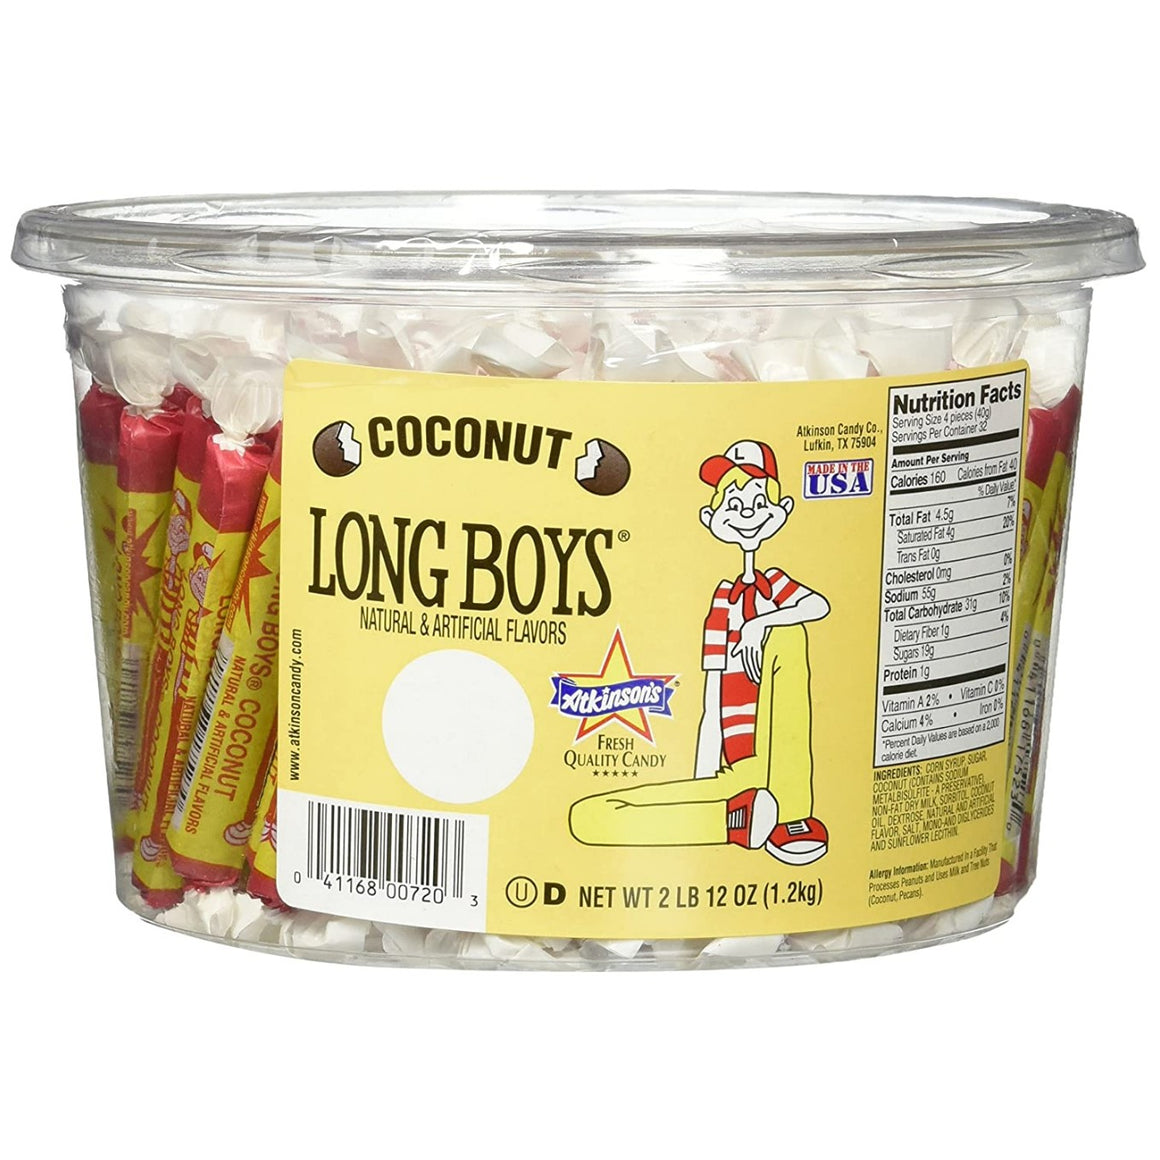 All City Candy Atkinson's Coconut Long Boys 130 pc. Tub Chewy Atkinson's Candy For fresh candy and great service, visit www.allcitycandy.com